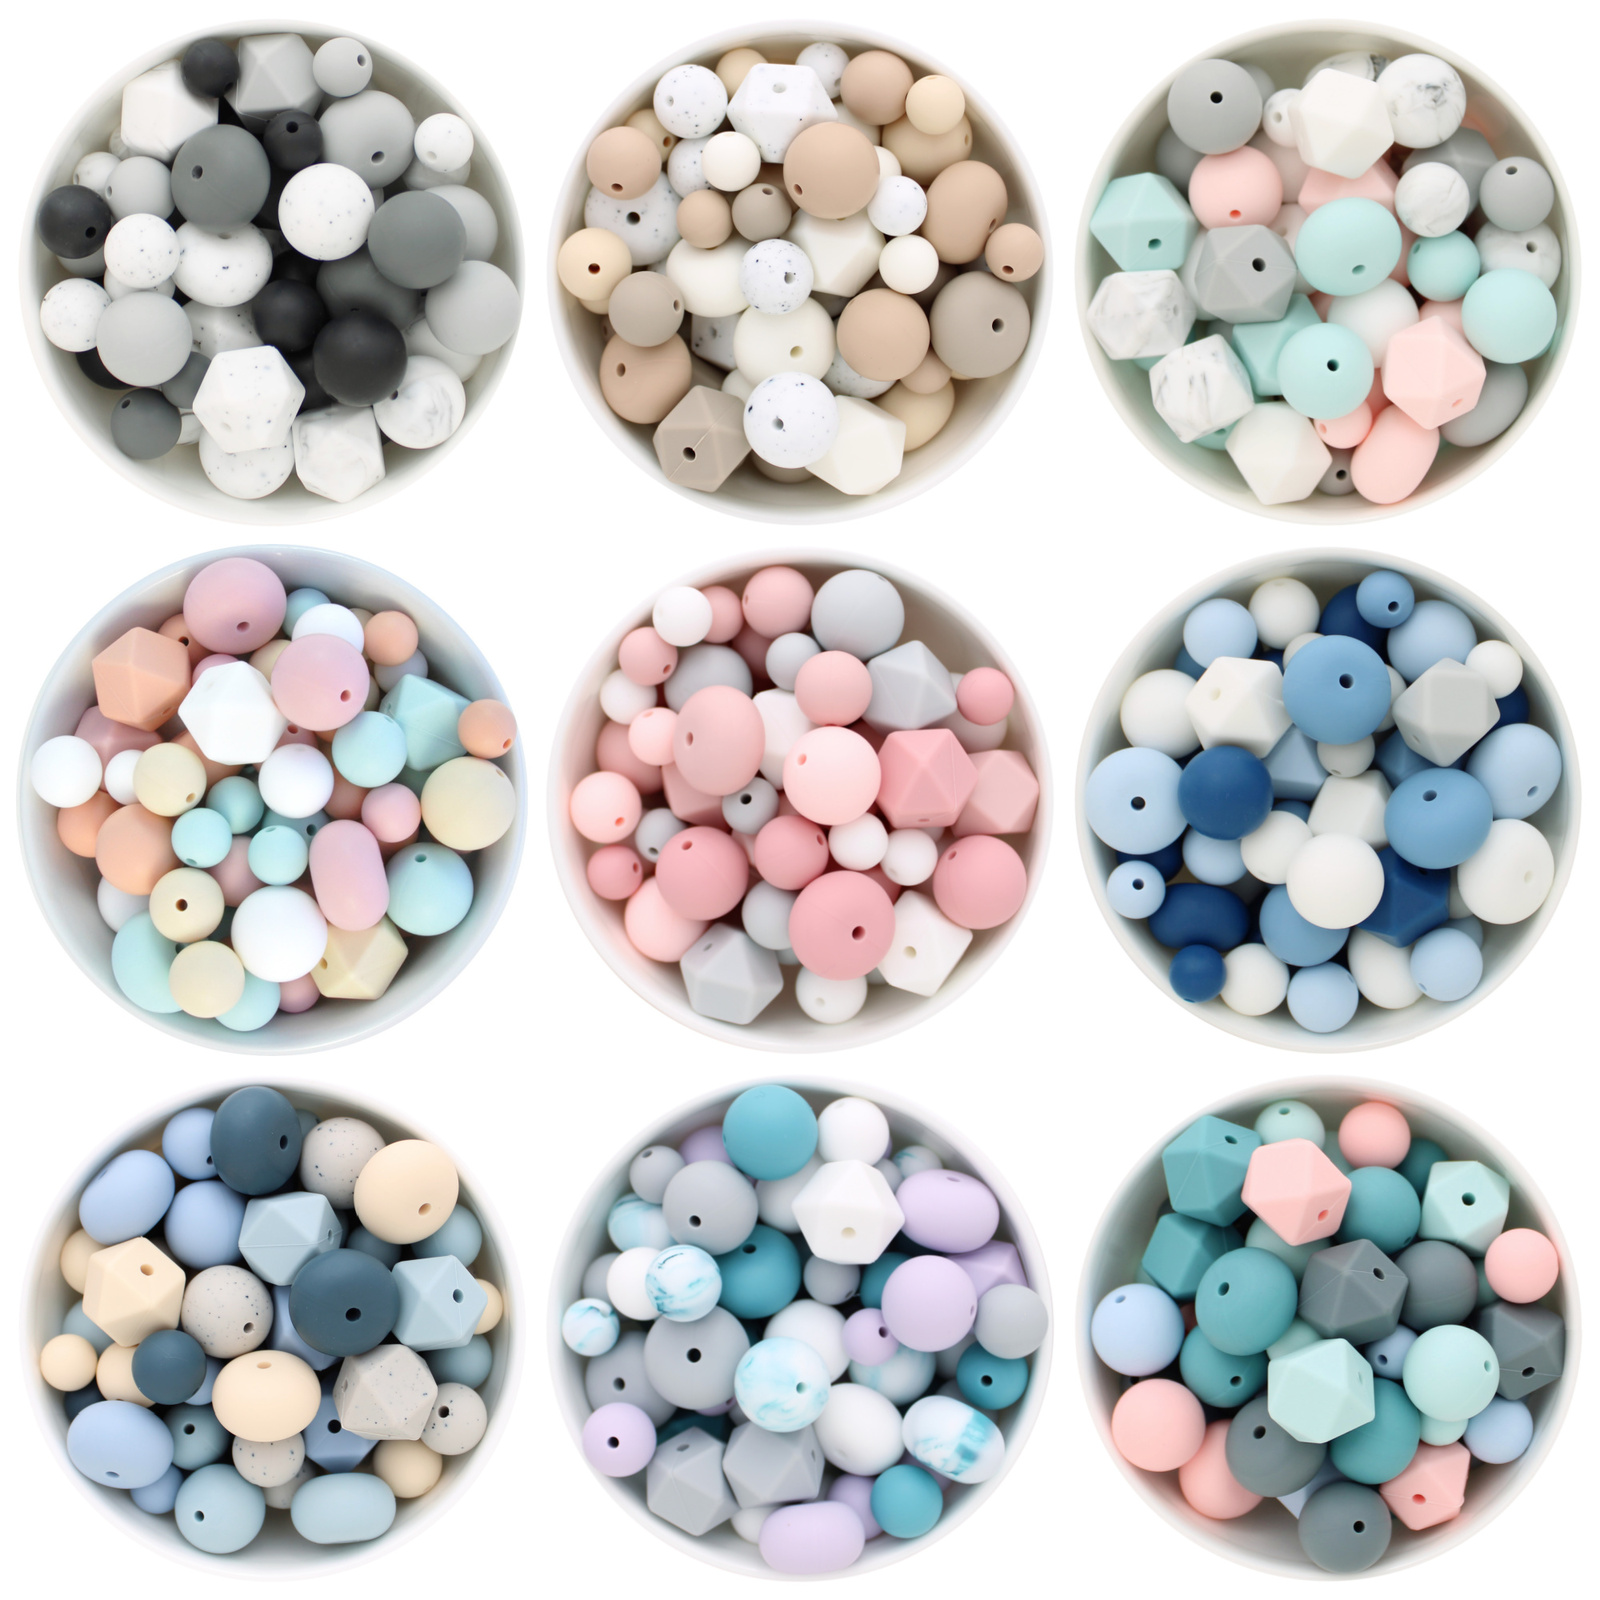 Variety Silicone Bead Value Pack